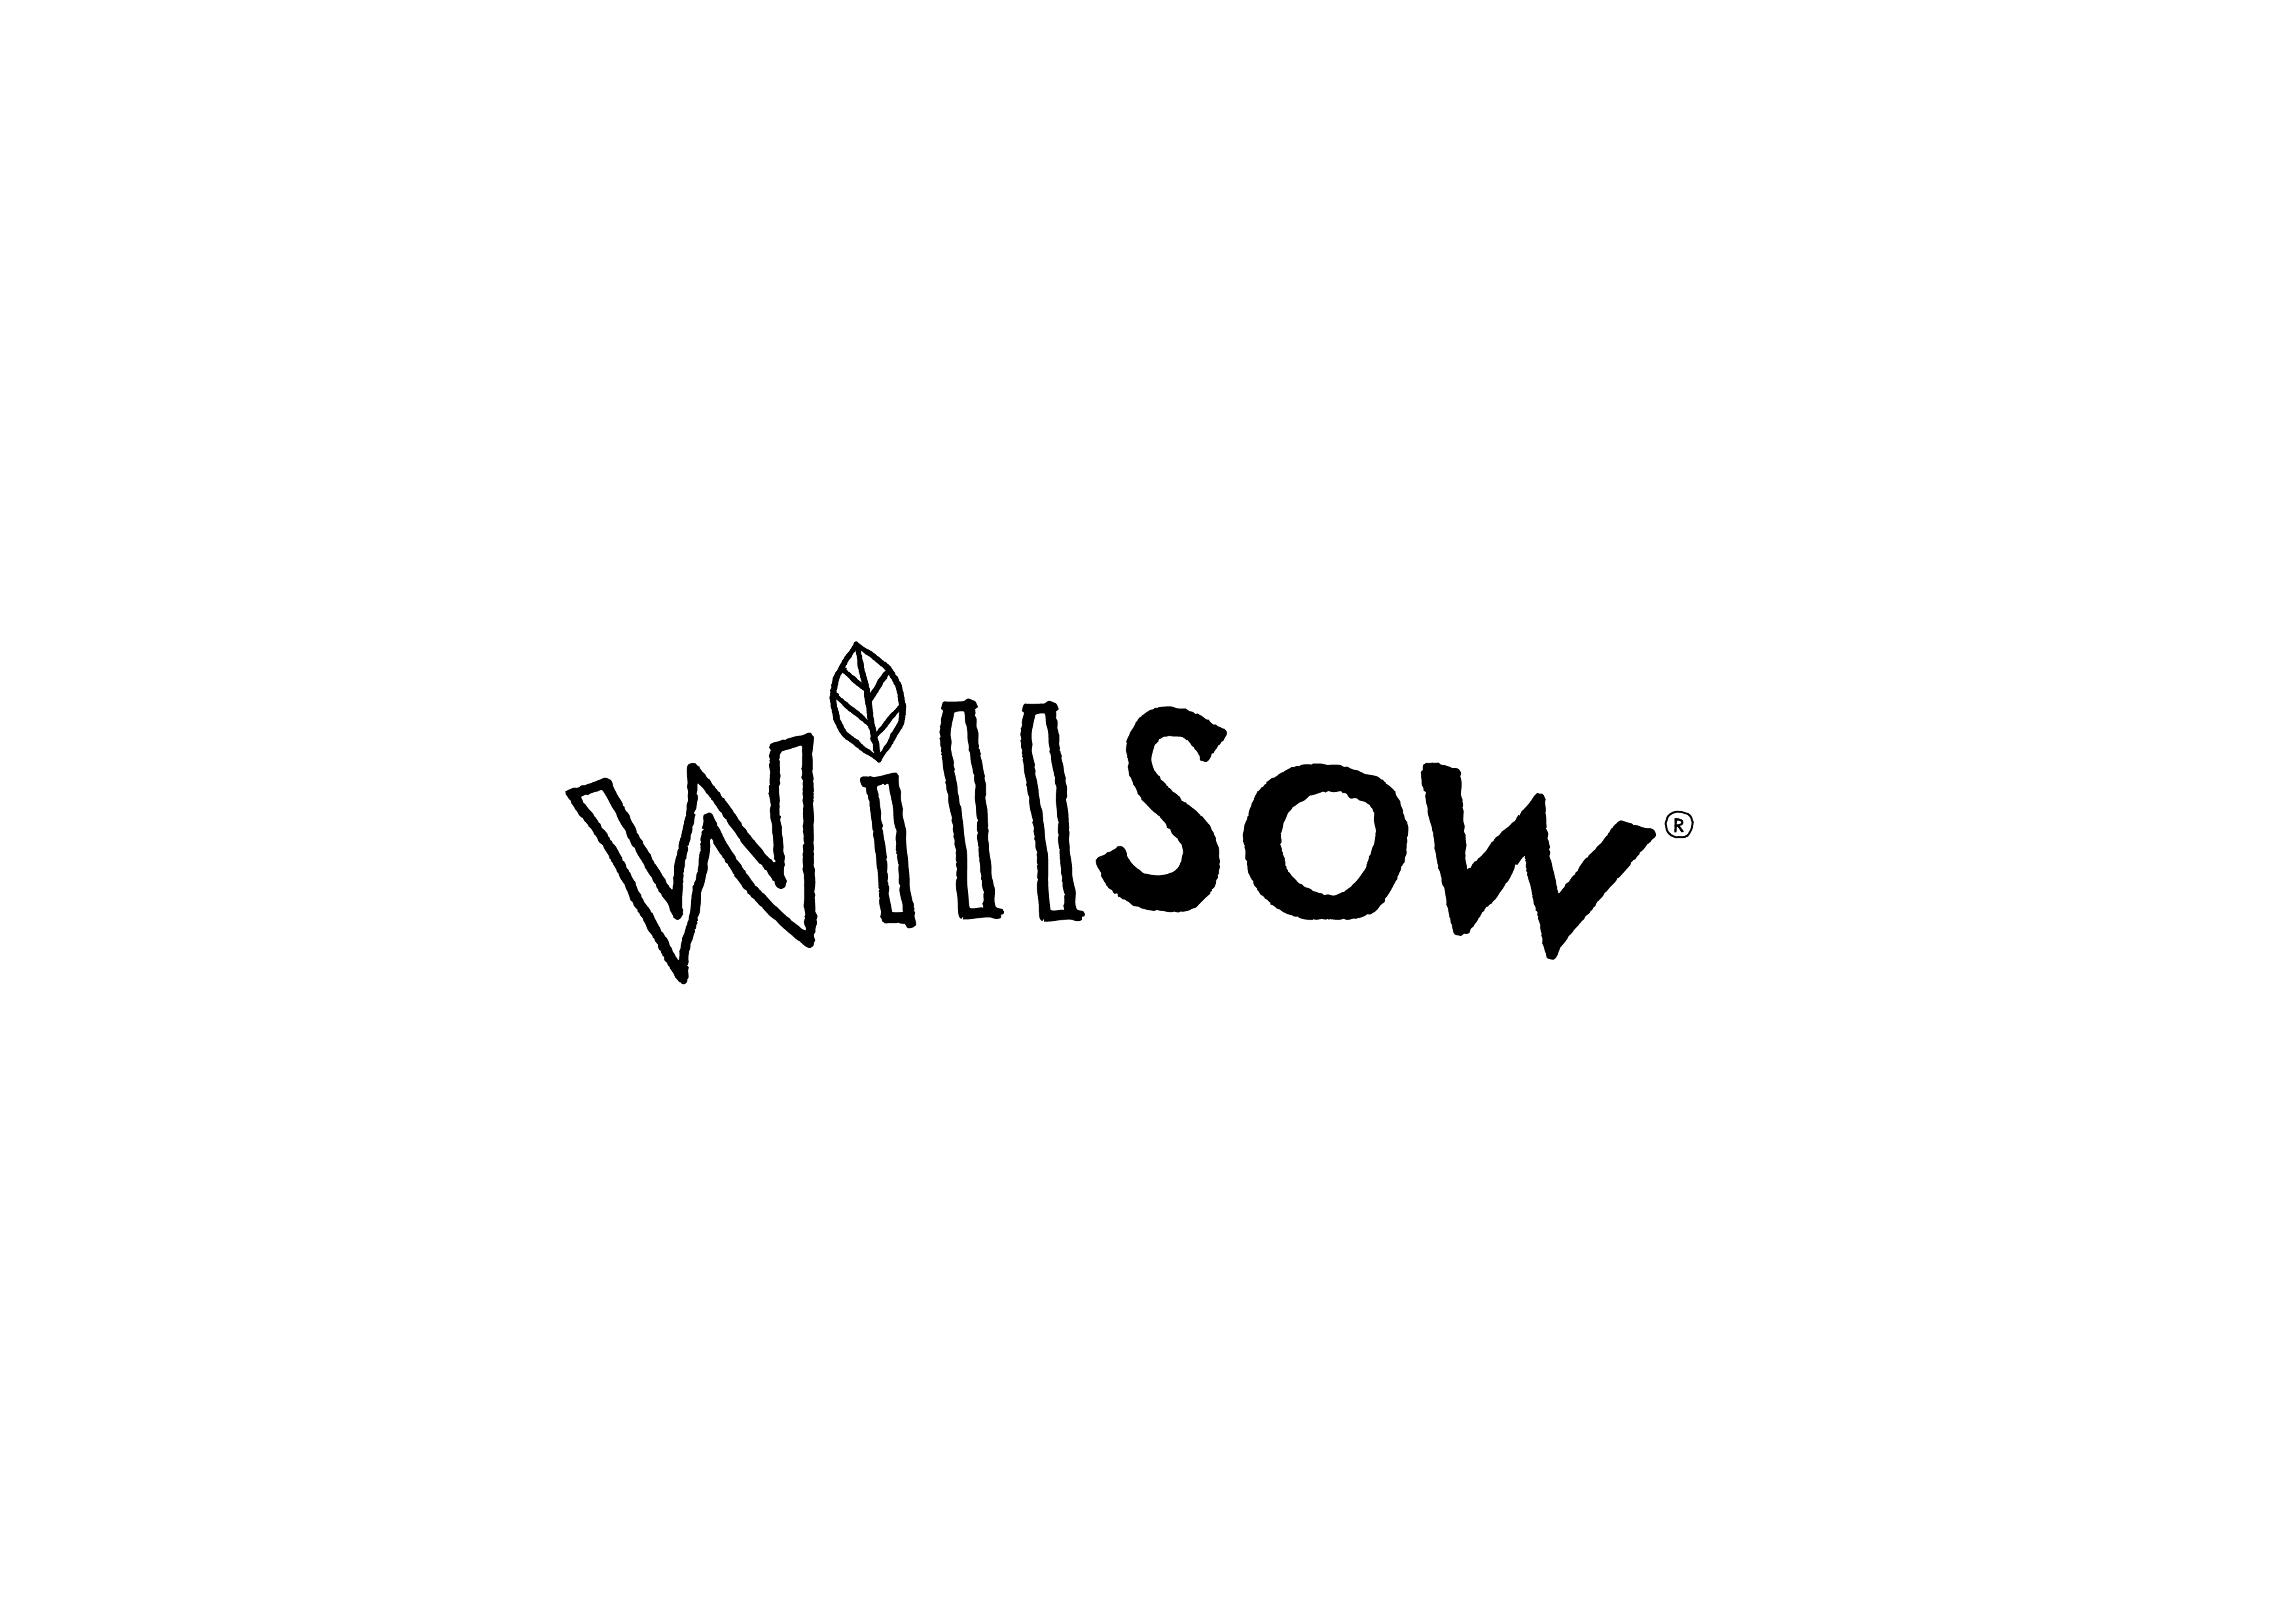 Willsow books, made of real carrot seeds. Read, plant and meet the characters! Where the end is just the beginning @willsow.books https://t.co/mNM4Iaue6Z #readmeseed